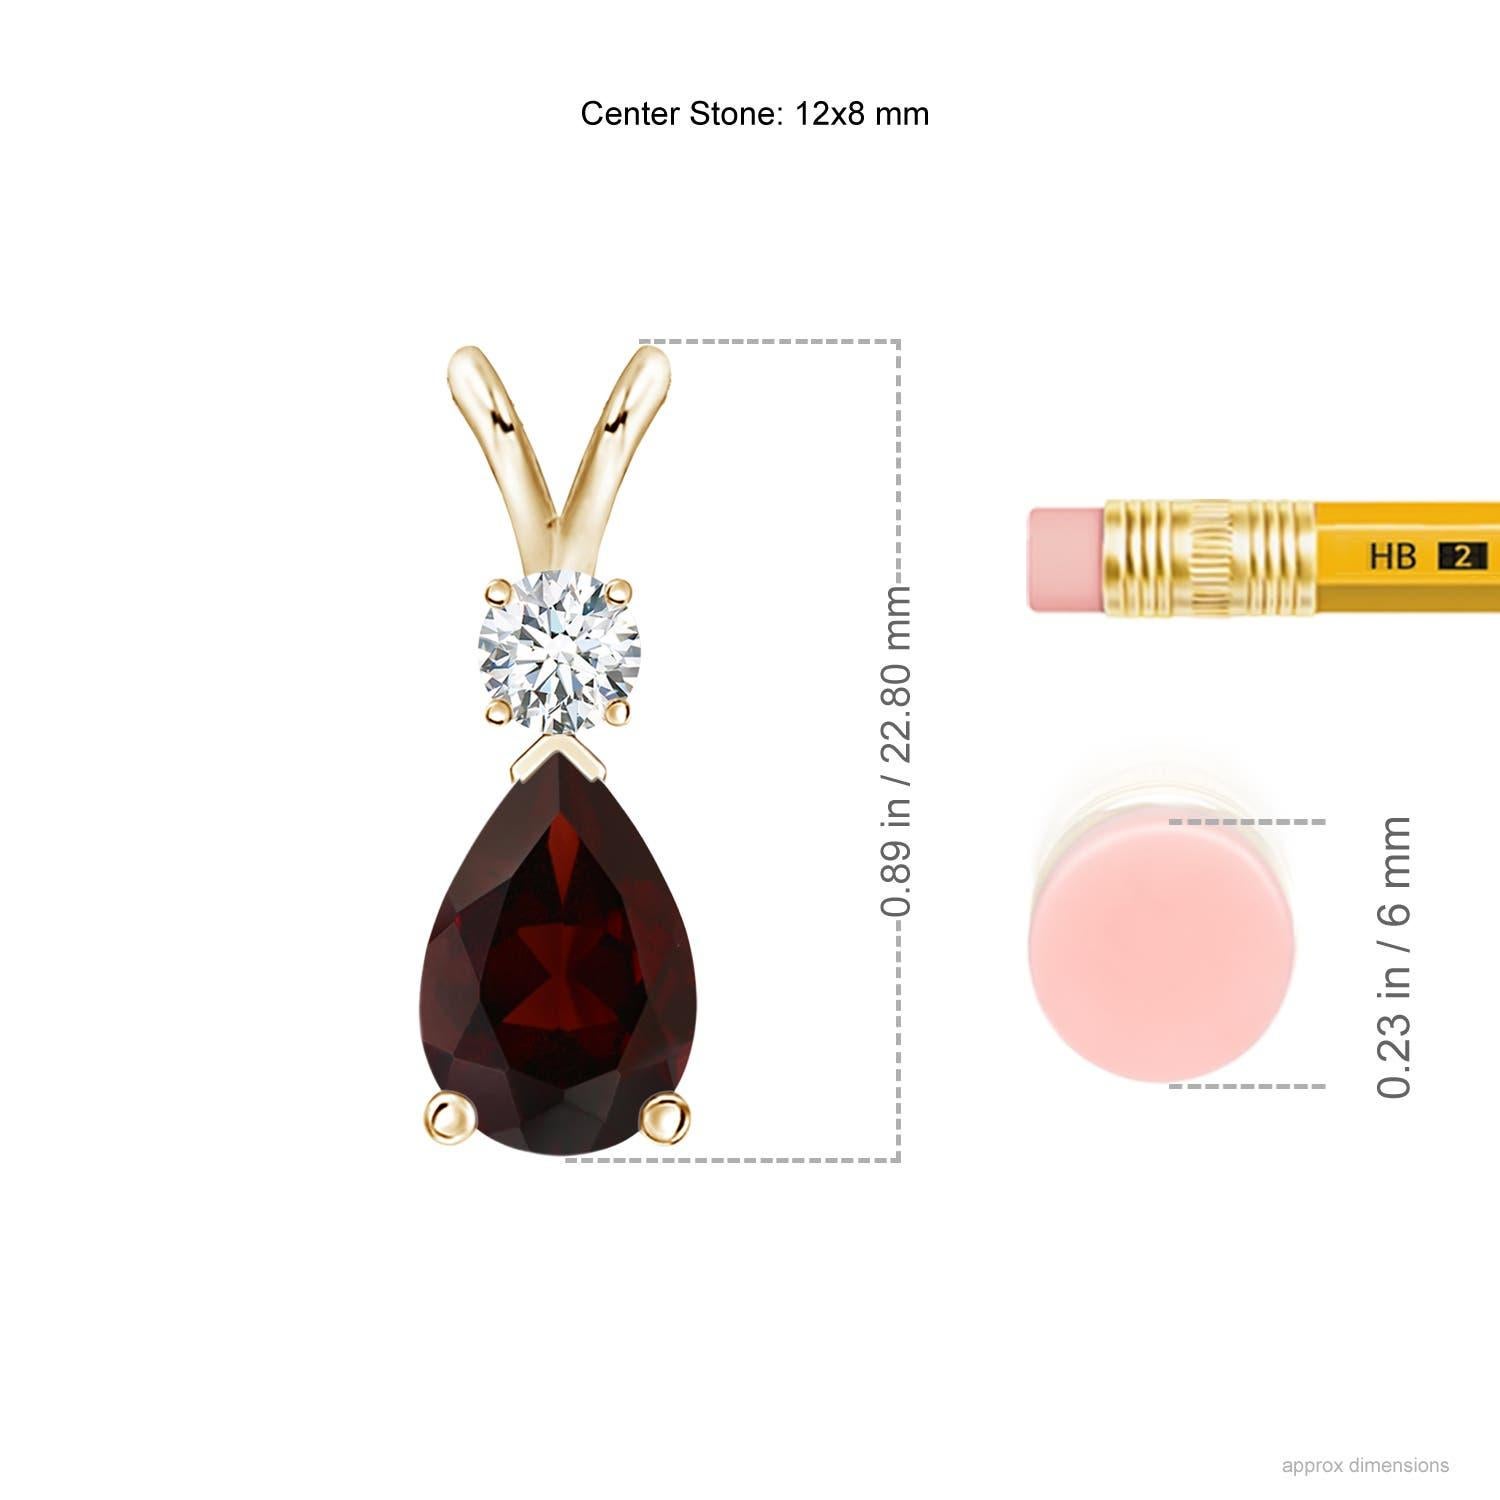 A pear-shaped intense red garnet is secured in a prong setting and embellished with a diamond accent on the top. Simple yet stunning, this teardrop garnet pendant with V bale is sculpted in 14k yellow gold.